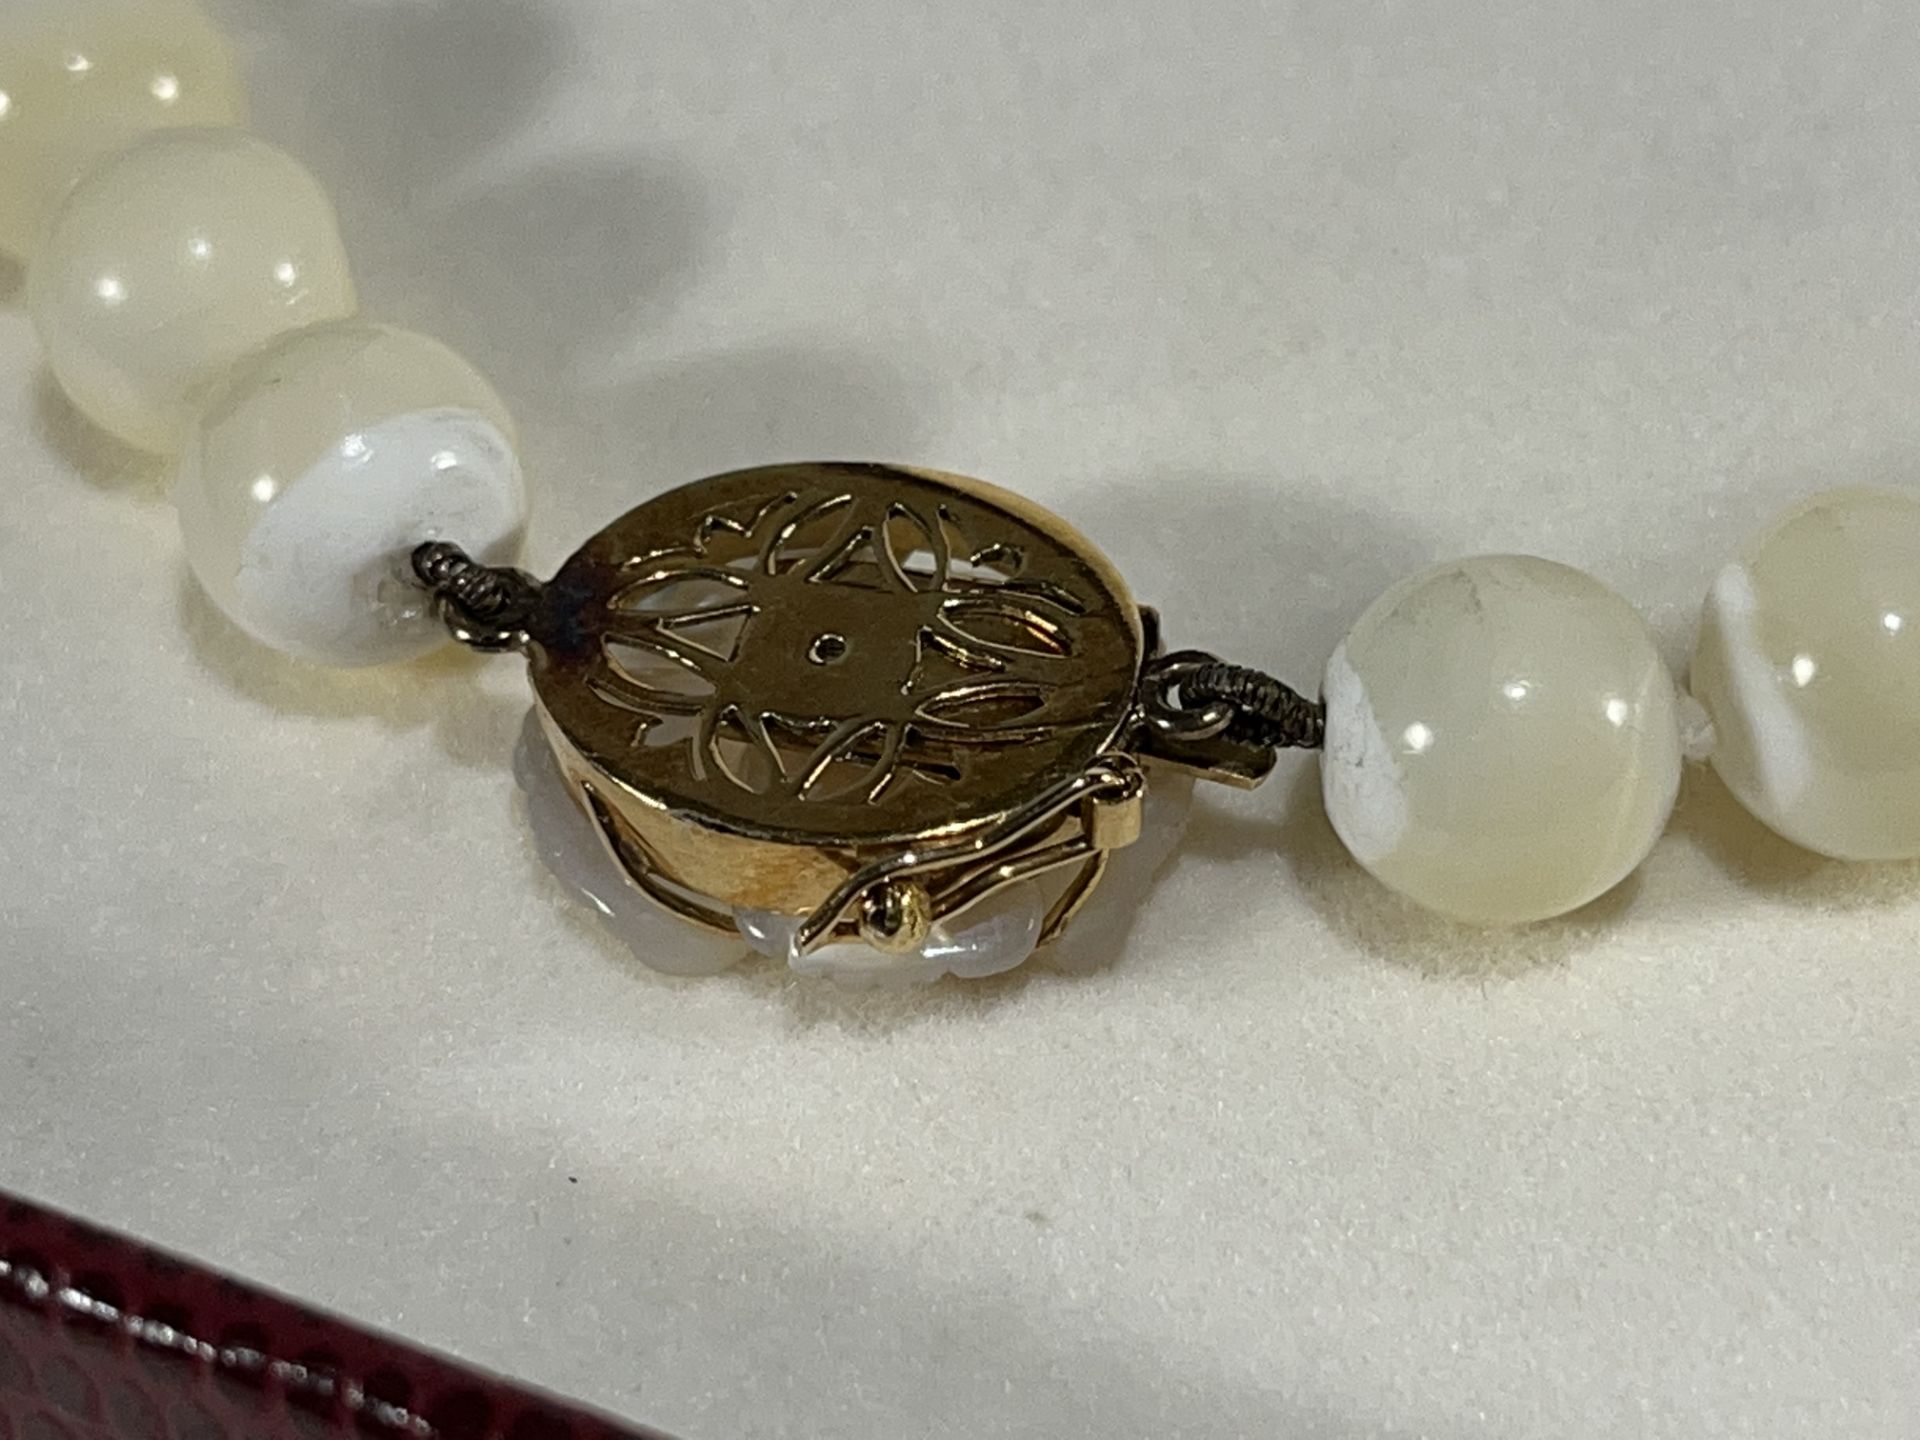 Elegant mother-of-pearl and mother-of-pearl necklace, mounted in 18k gold - Image 3 of 5